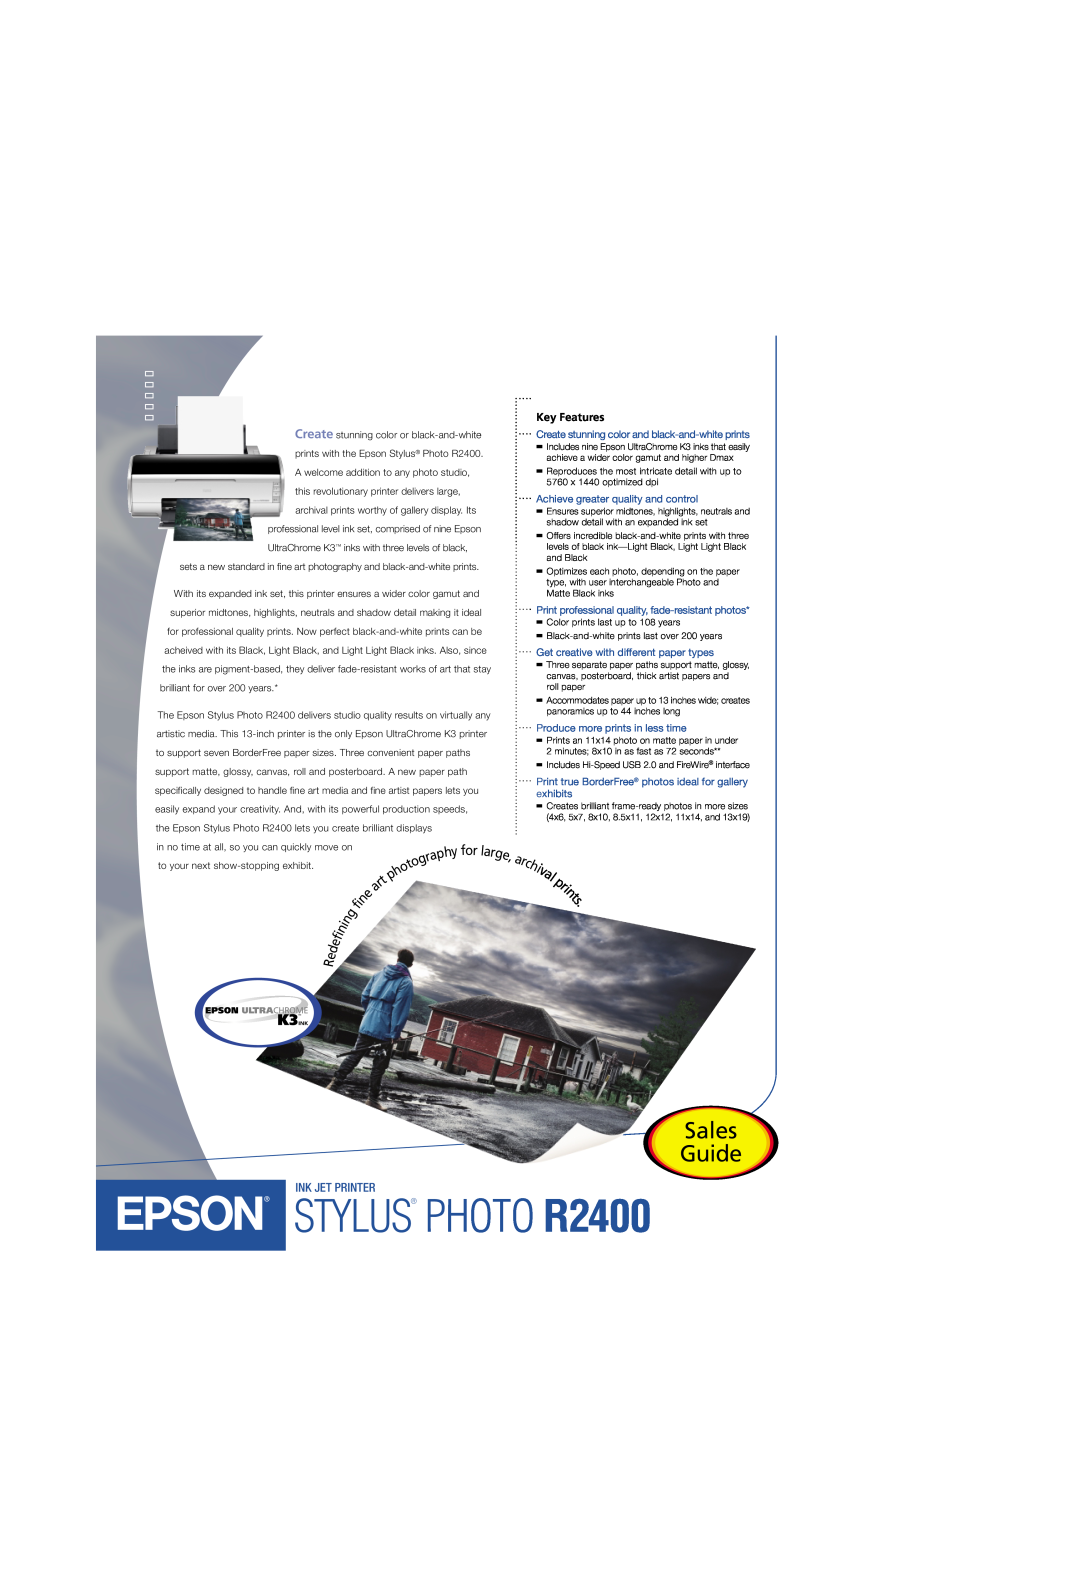 Epson manual STYLUS PHOTO R2400, Sales Guide, Ink Jet Printer, Key Features 